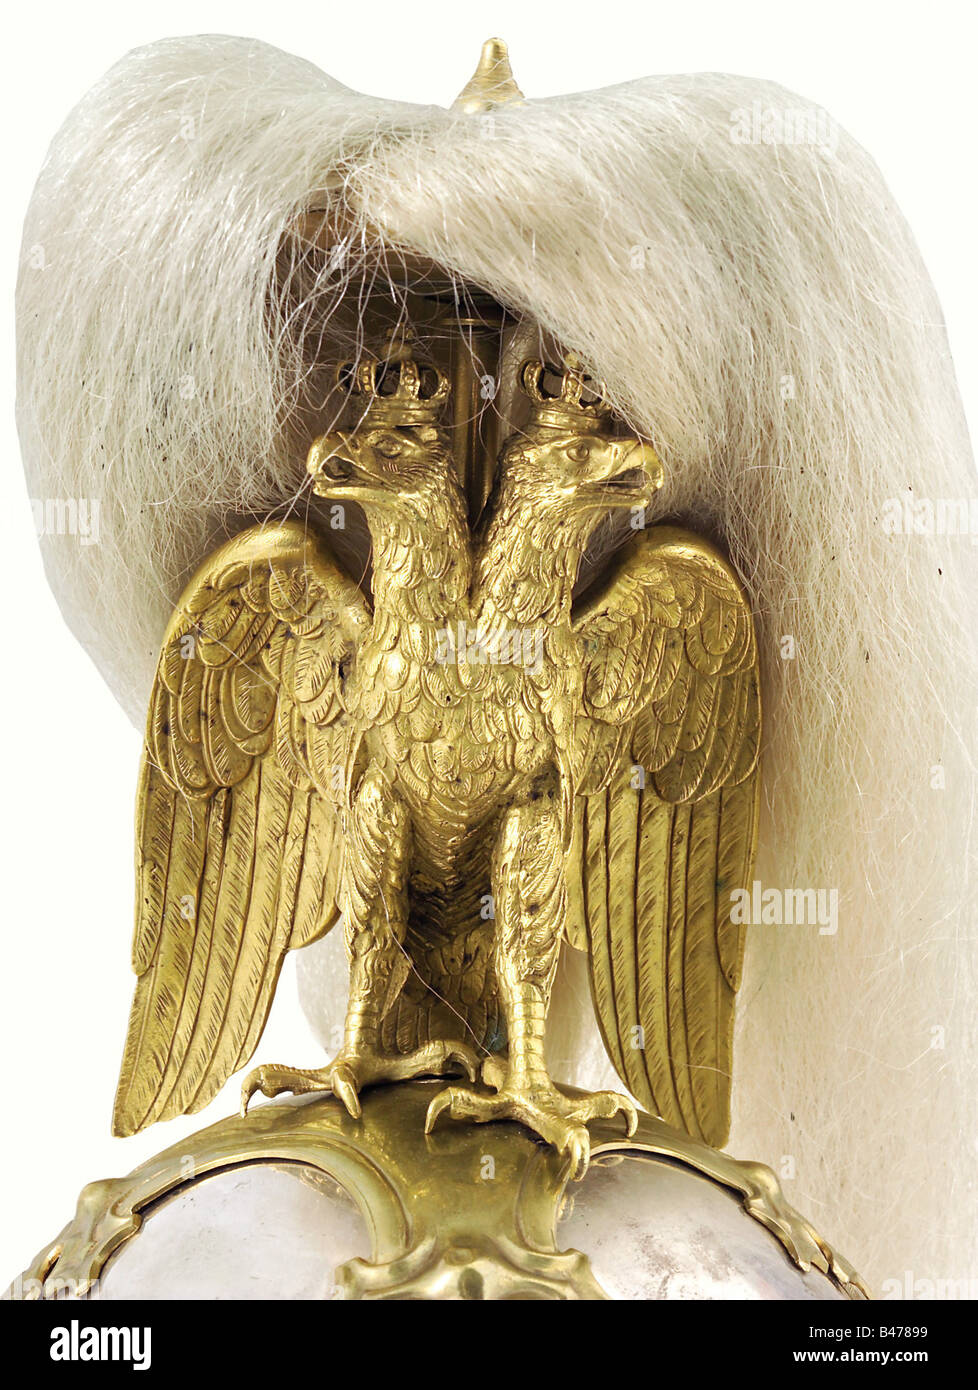 A regulation helmet for the k.u.k First Arcièren Life Guards, according to the 1905 standard for equipment and uniforms of the First Arcièren Life Guards. Fire-silver plated, nickel-silver skull, with the master's mark 'HS' on the nape. Armory stamps 'N20' and '40D'. The number '7' is stamped on the top. The bronze, crowned double eagle and the beautifully worked mountings which show some scratched marks and stamped numbers are fire gilded with abrasions in places. The metal chinscales are backed with black velvet. Champagne coloured silk lining, fine leather s, Stock Photo